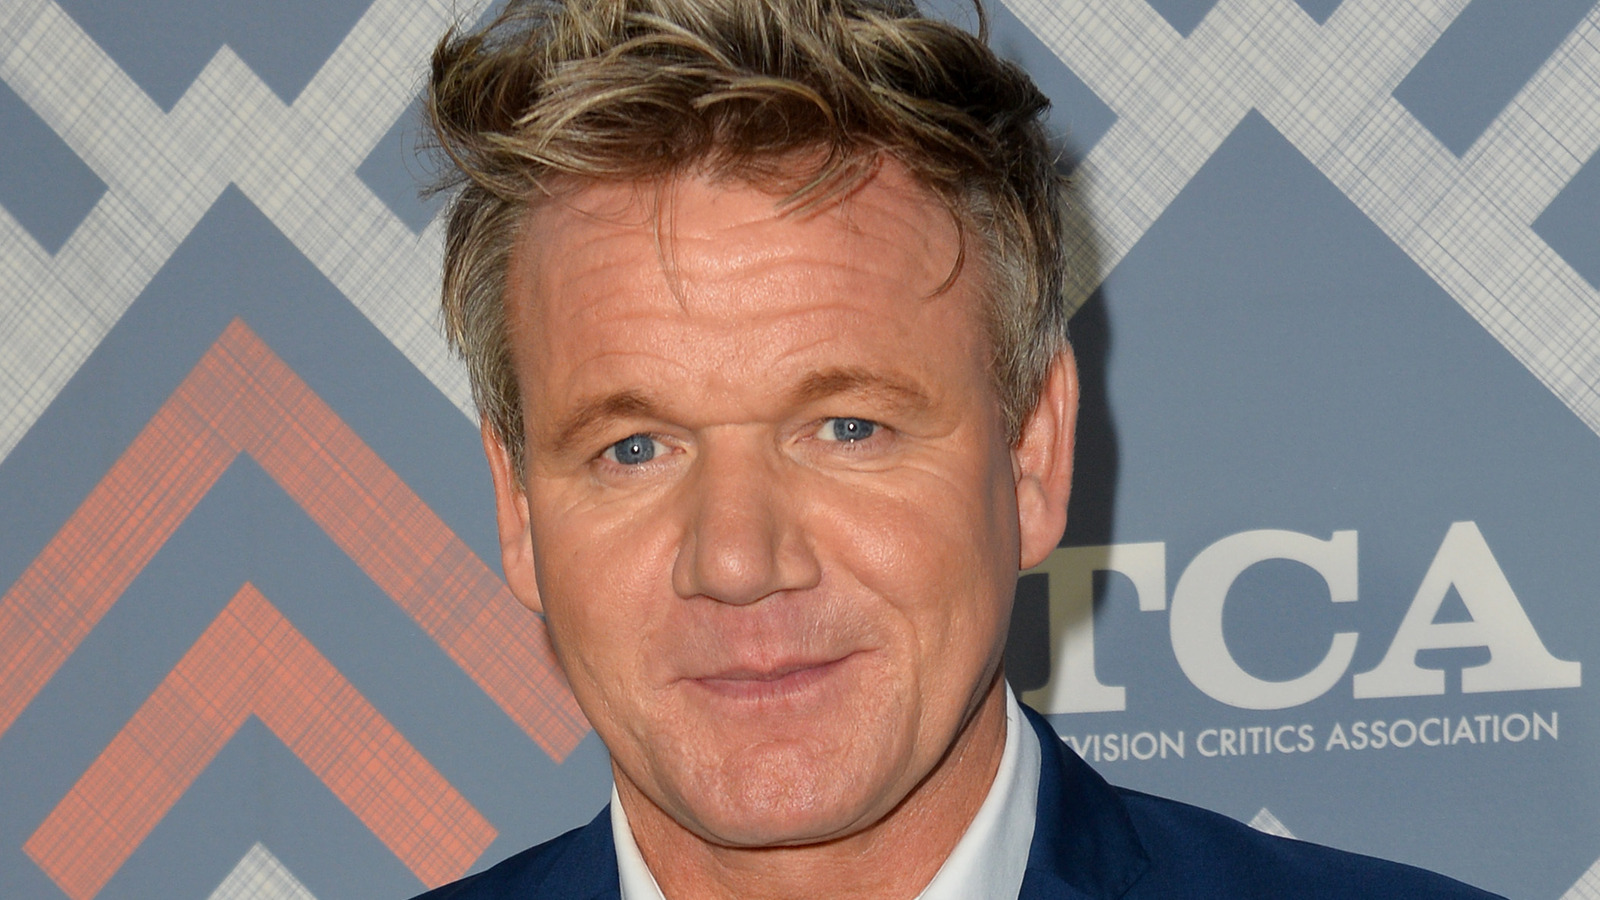 Shocking Us All, Gordon Ramsay Has Entered The Frozen Food Game – Mashed